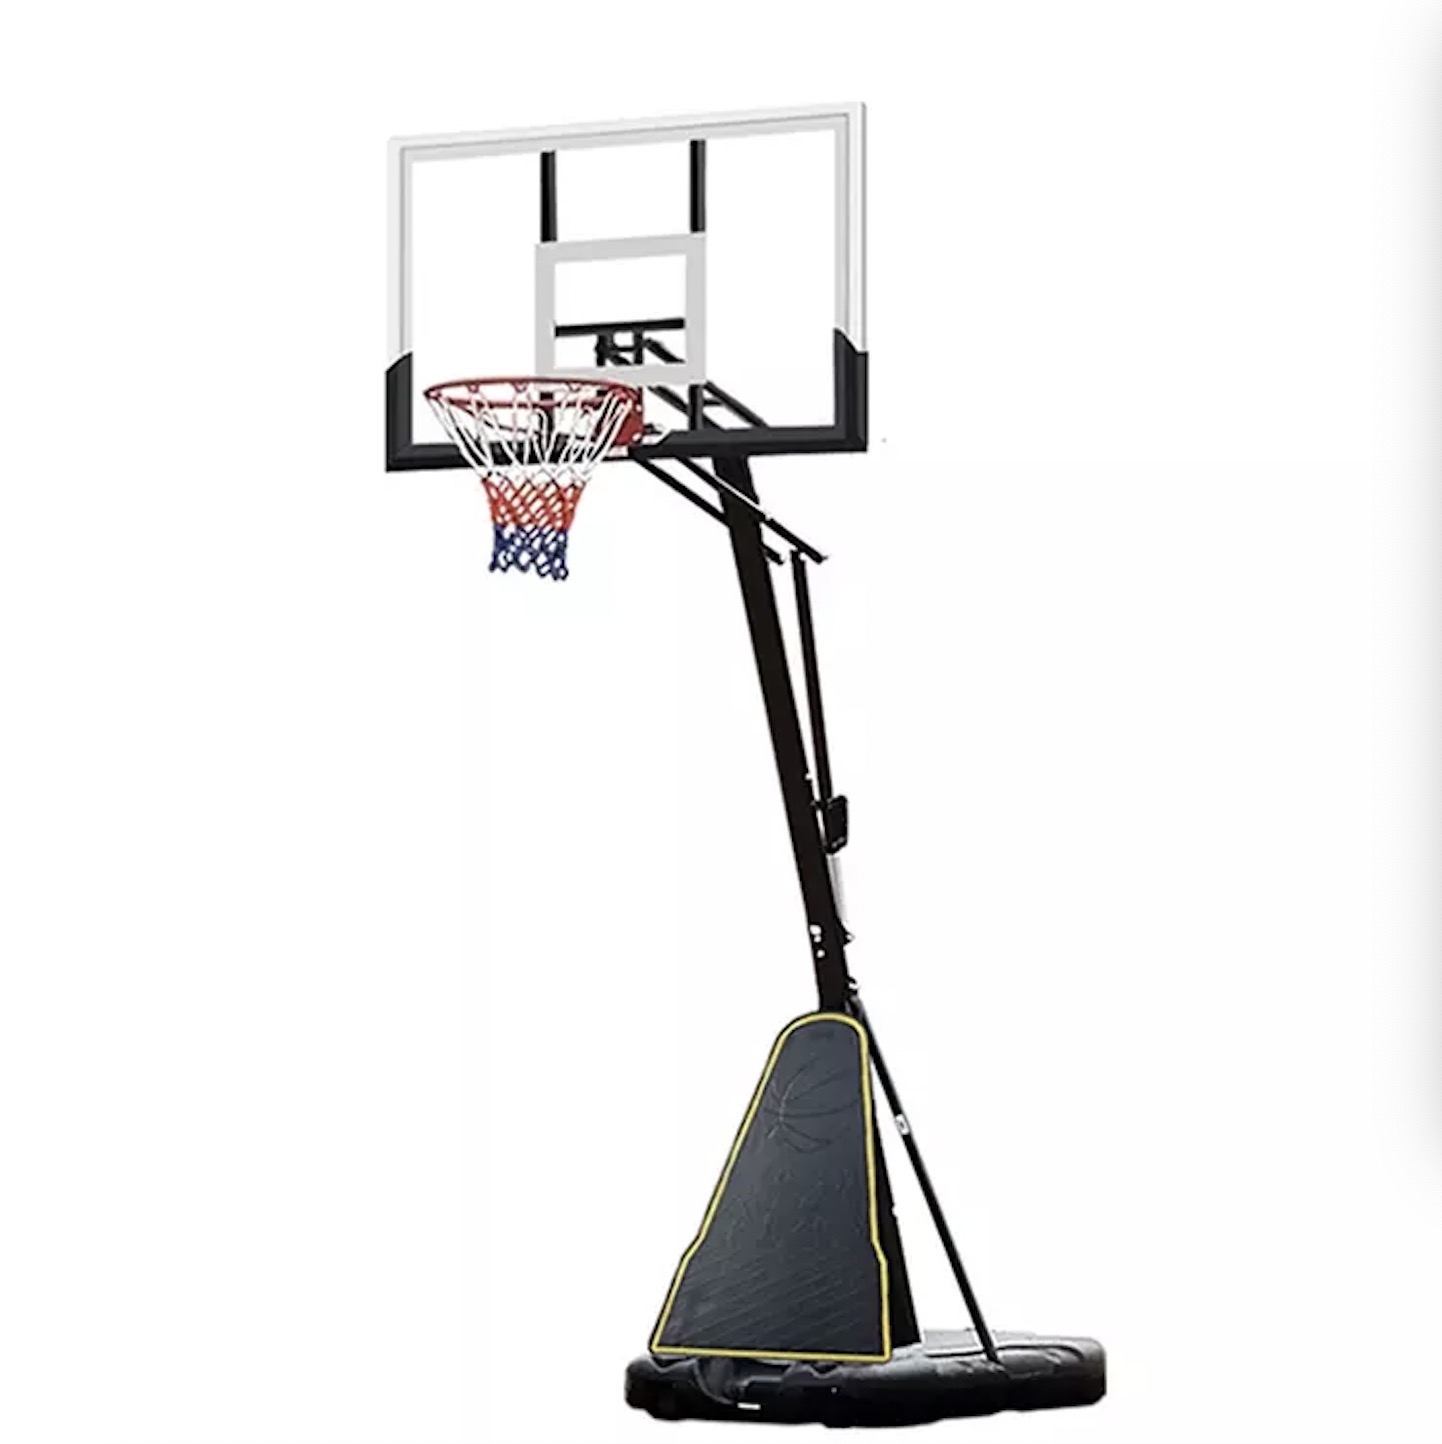 54” backboard Tempered glass Dunk Basketball hoop Basketball stand 5v5 competition Street basketball Outdoor movable